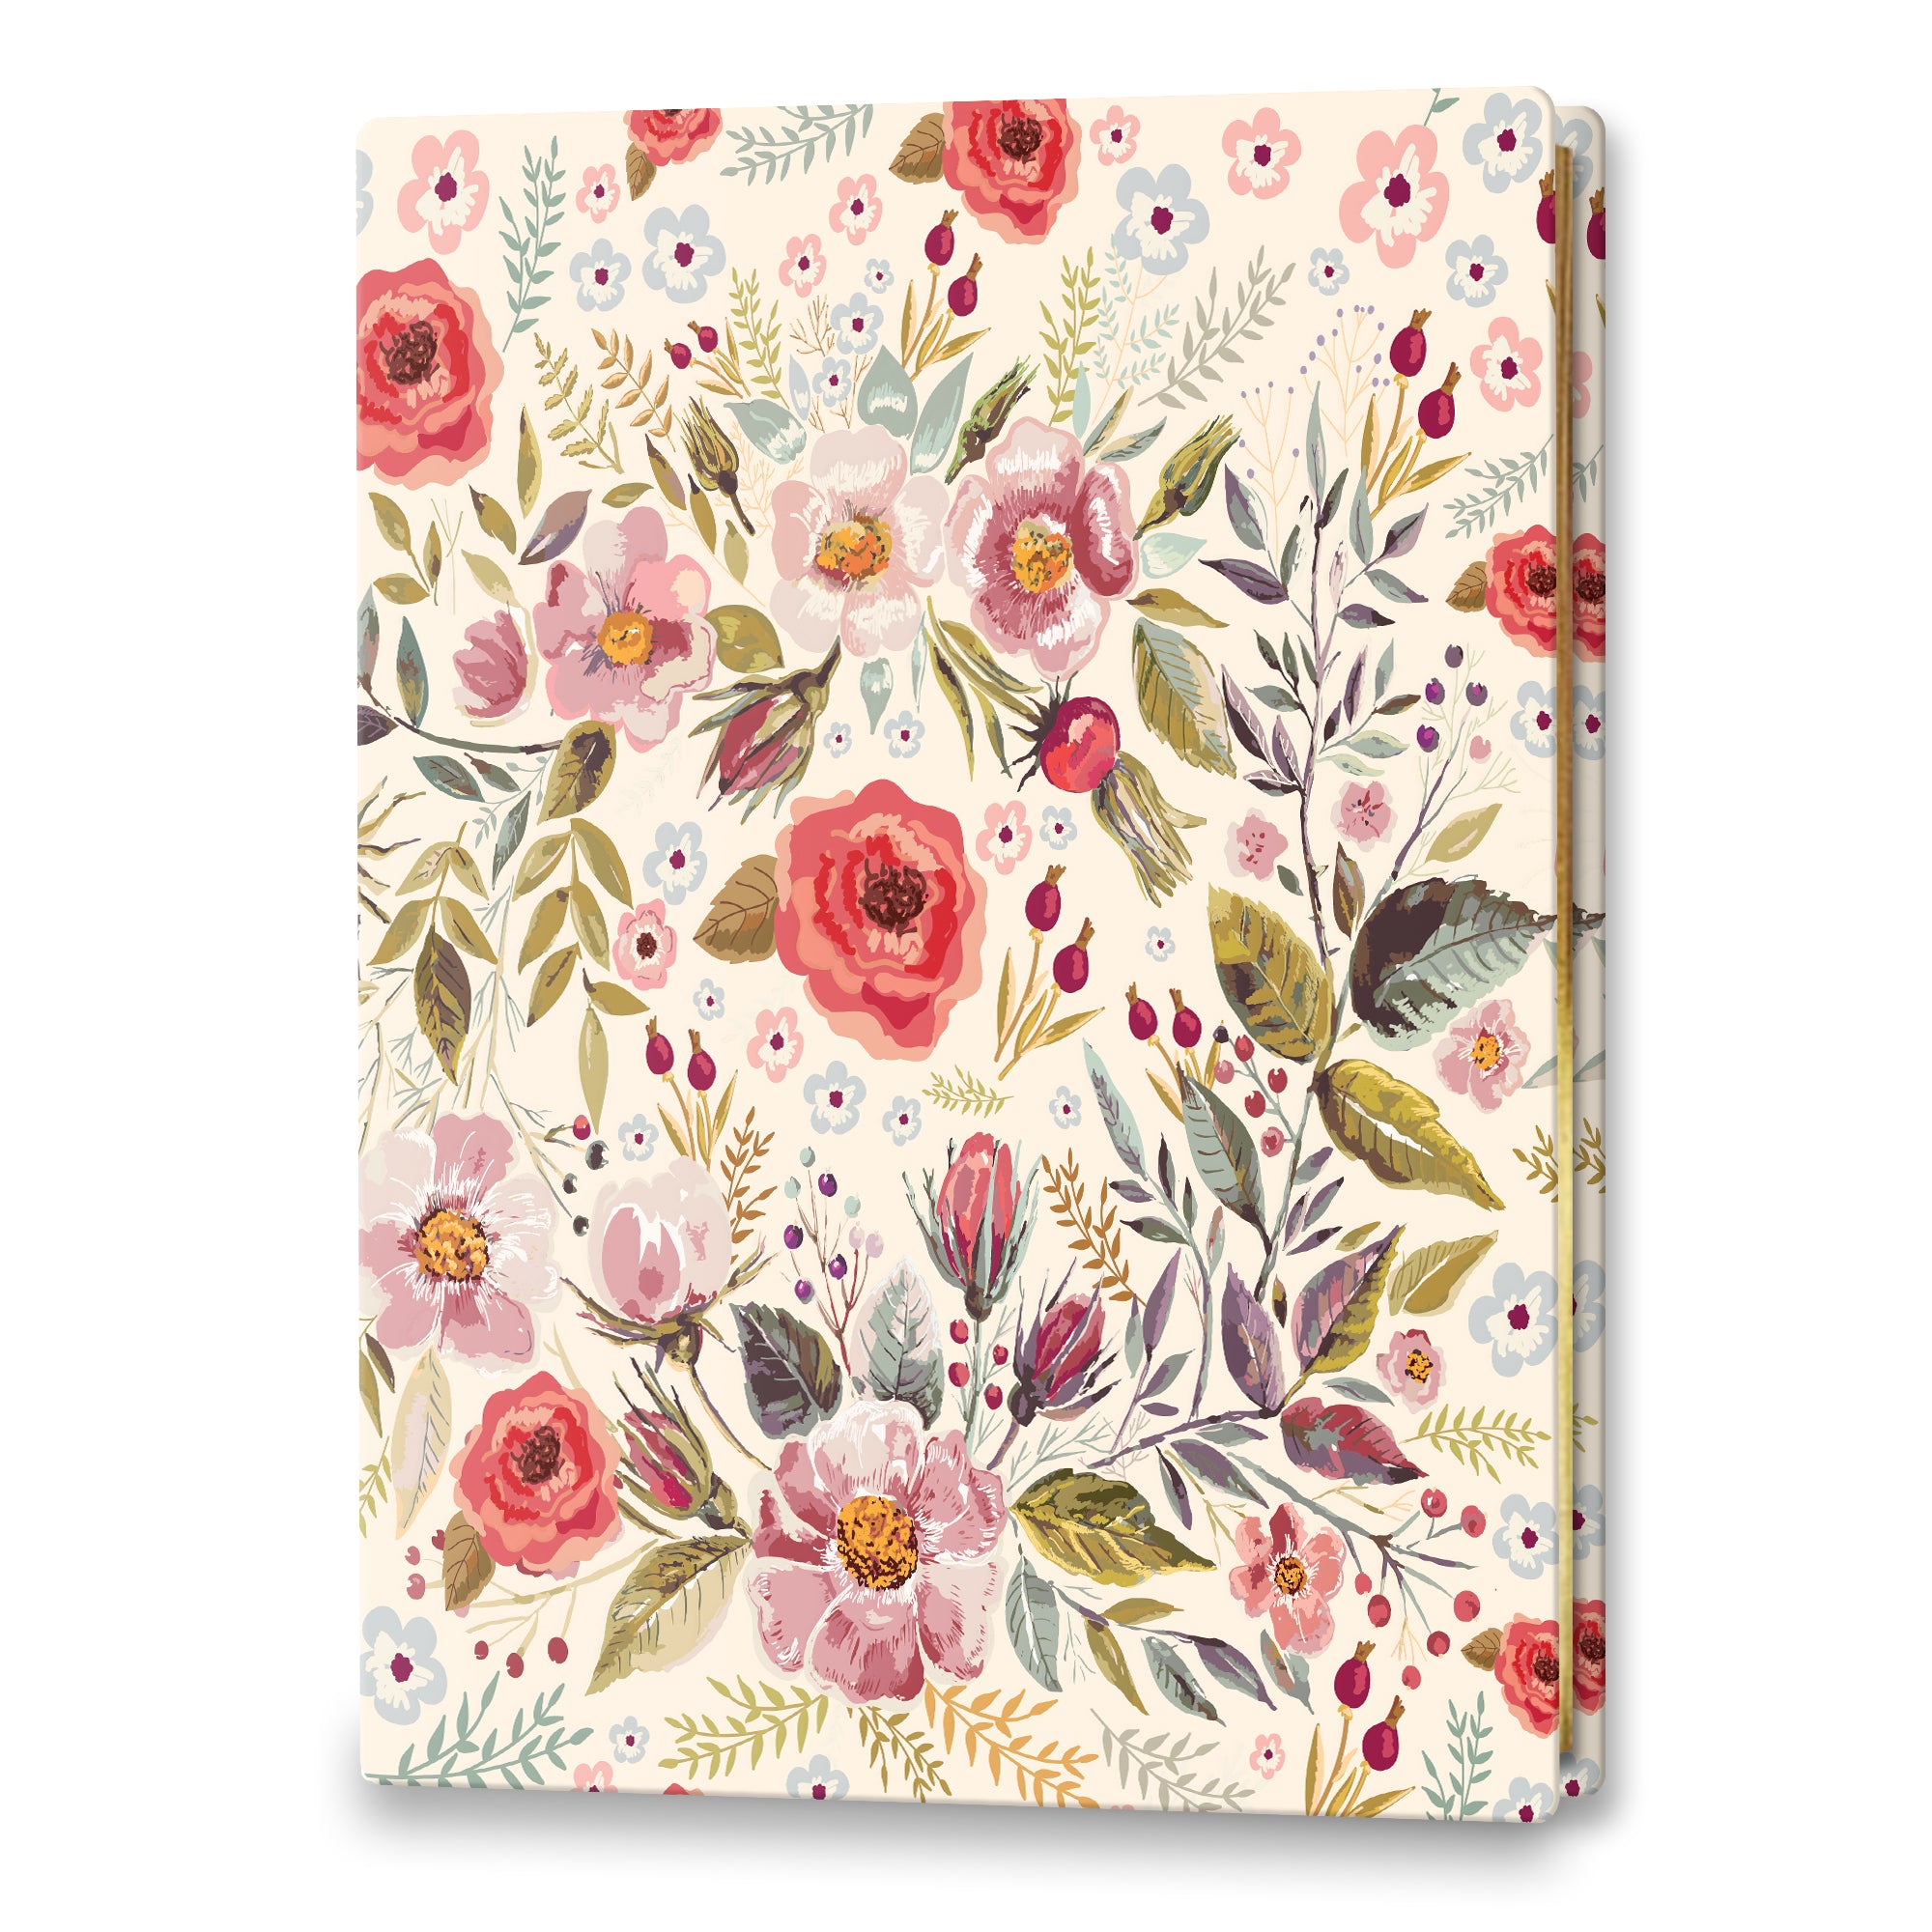 Undated 8x10 Softcover Planner - Floral Bliss